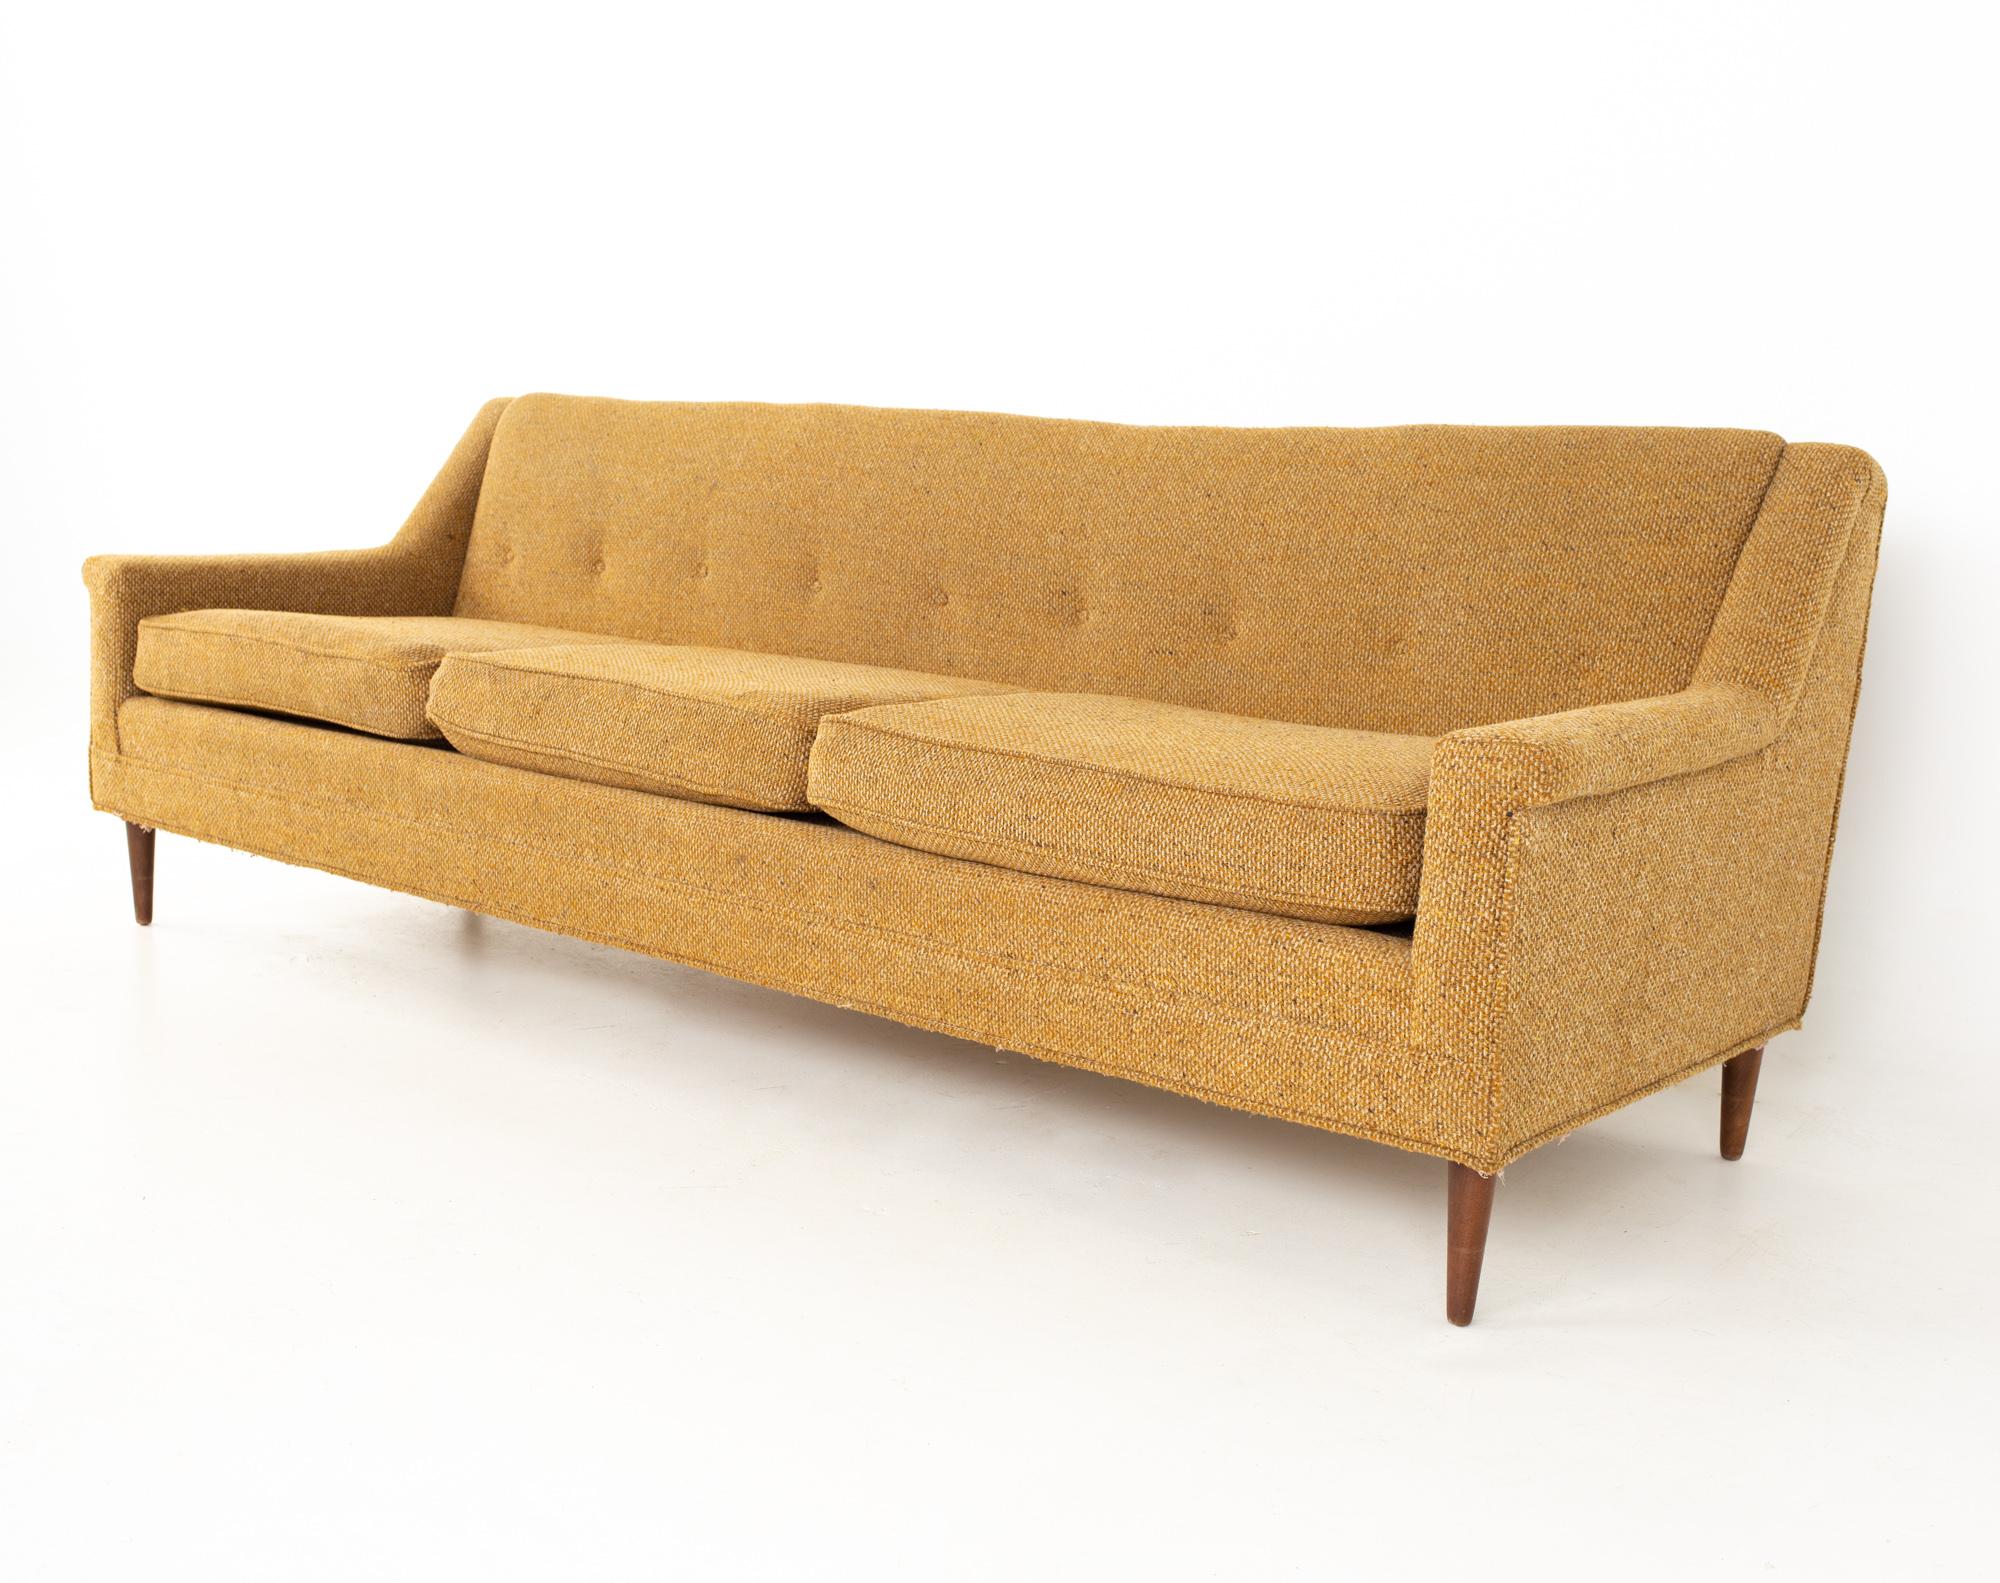 Flexsteel mid century sofa
Sofa measures: 87 wide x 31 deep x 29 high, with a seat height of 17 inches 

All pieces of furniture can be had in what we call restored vintage condition. That means the piece is restored upon purchase so it’s free of